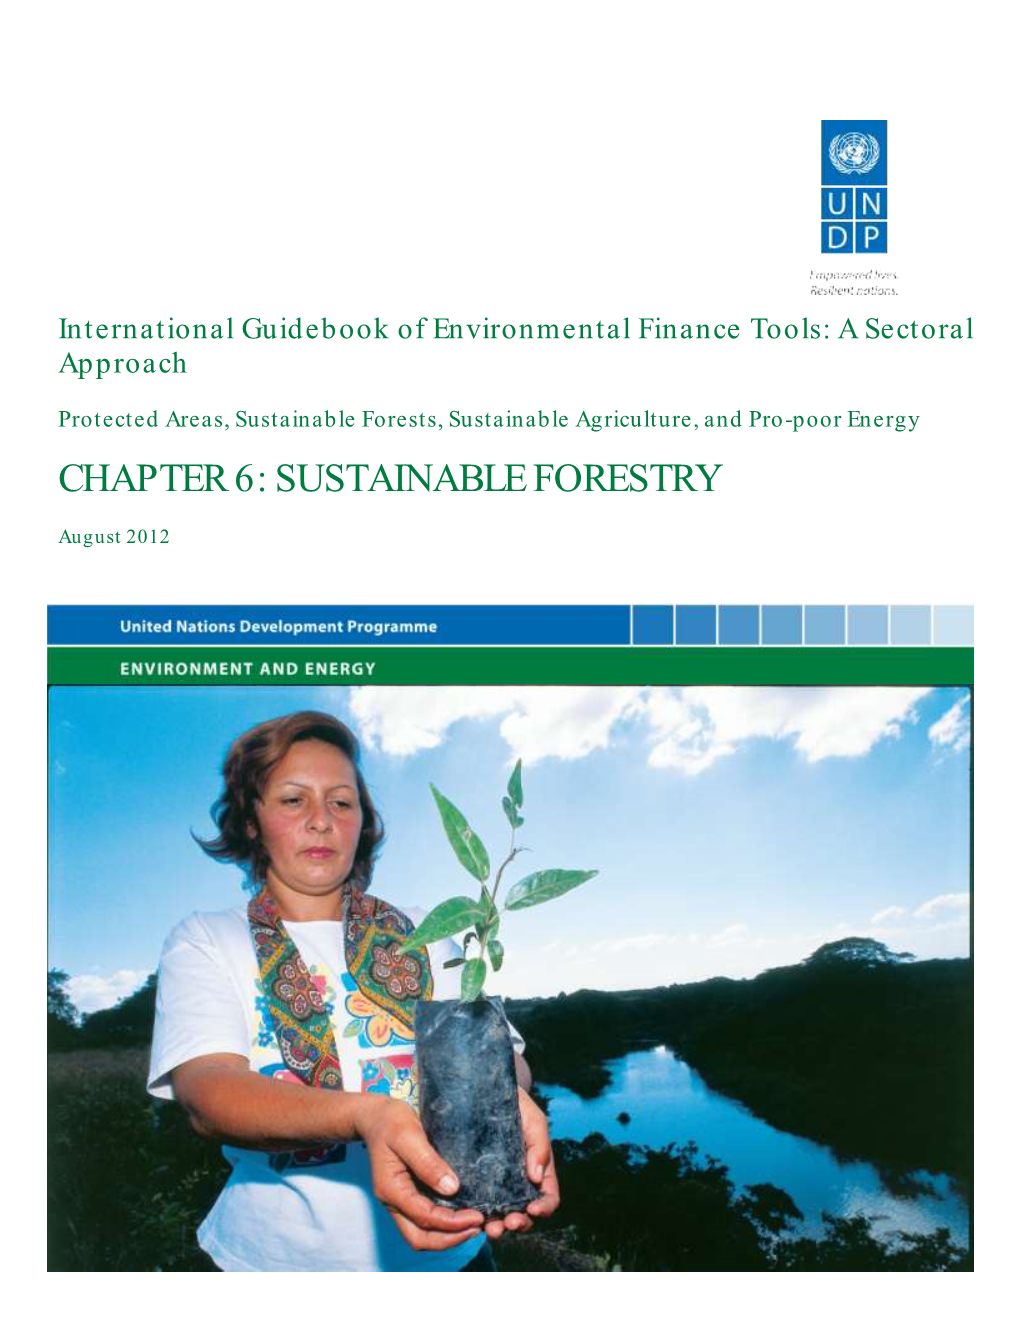 Chapter 6: Sustainable Forestry